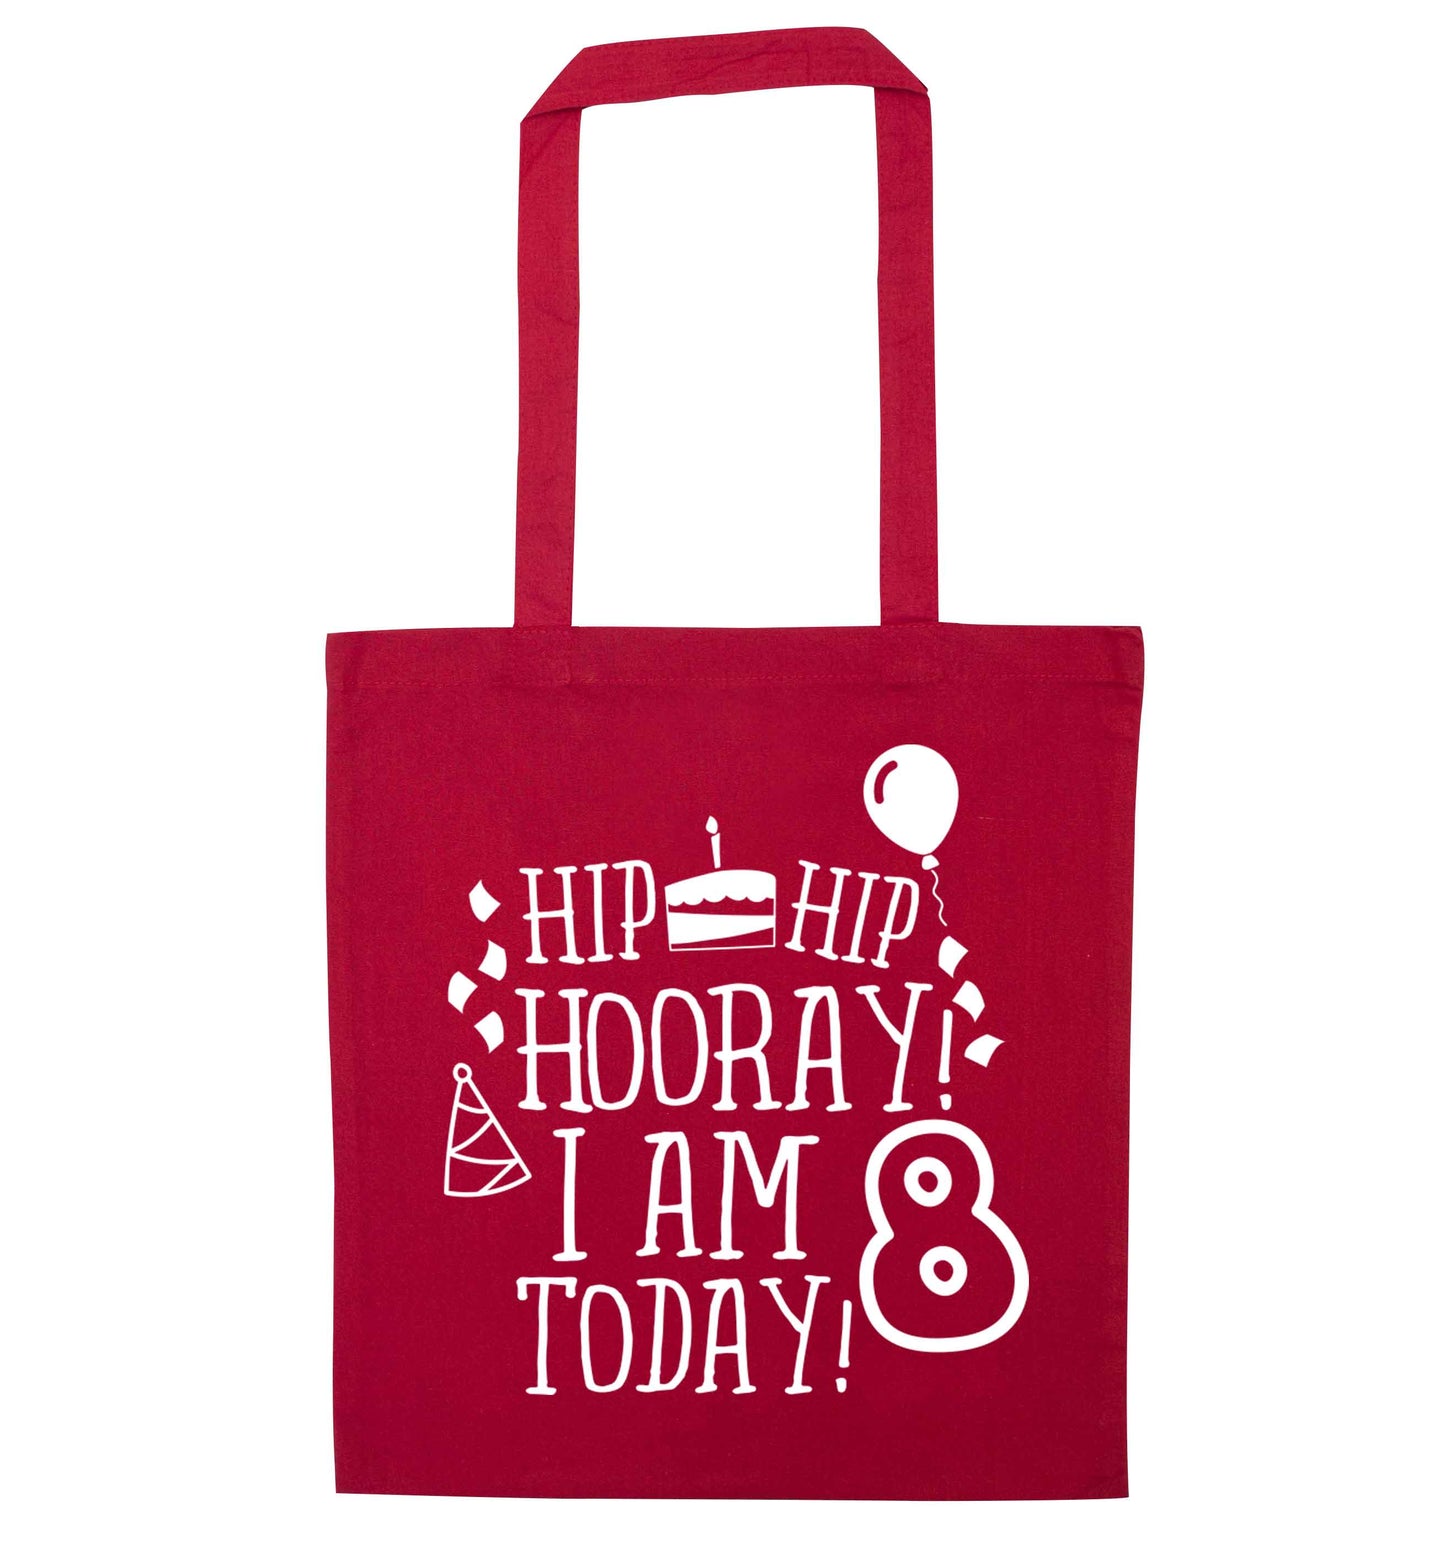 Hip hip hooray I am 8 today! red tote bag